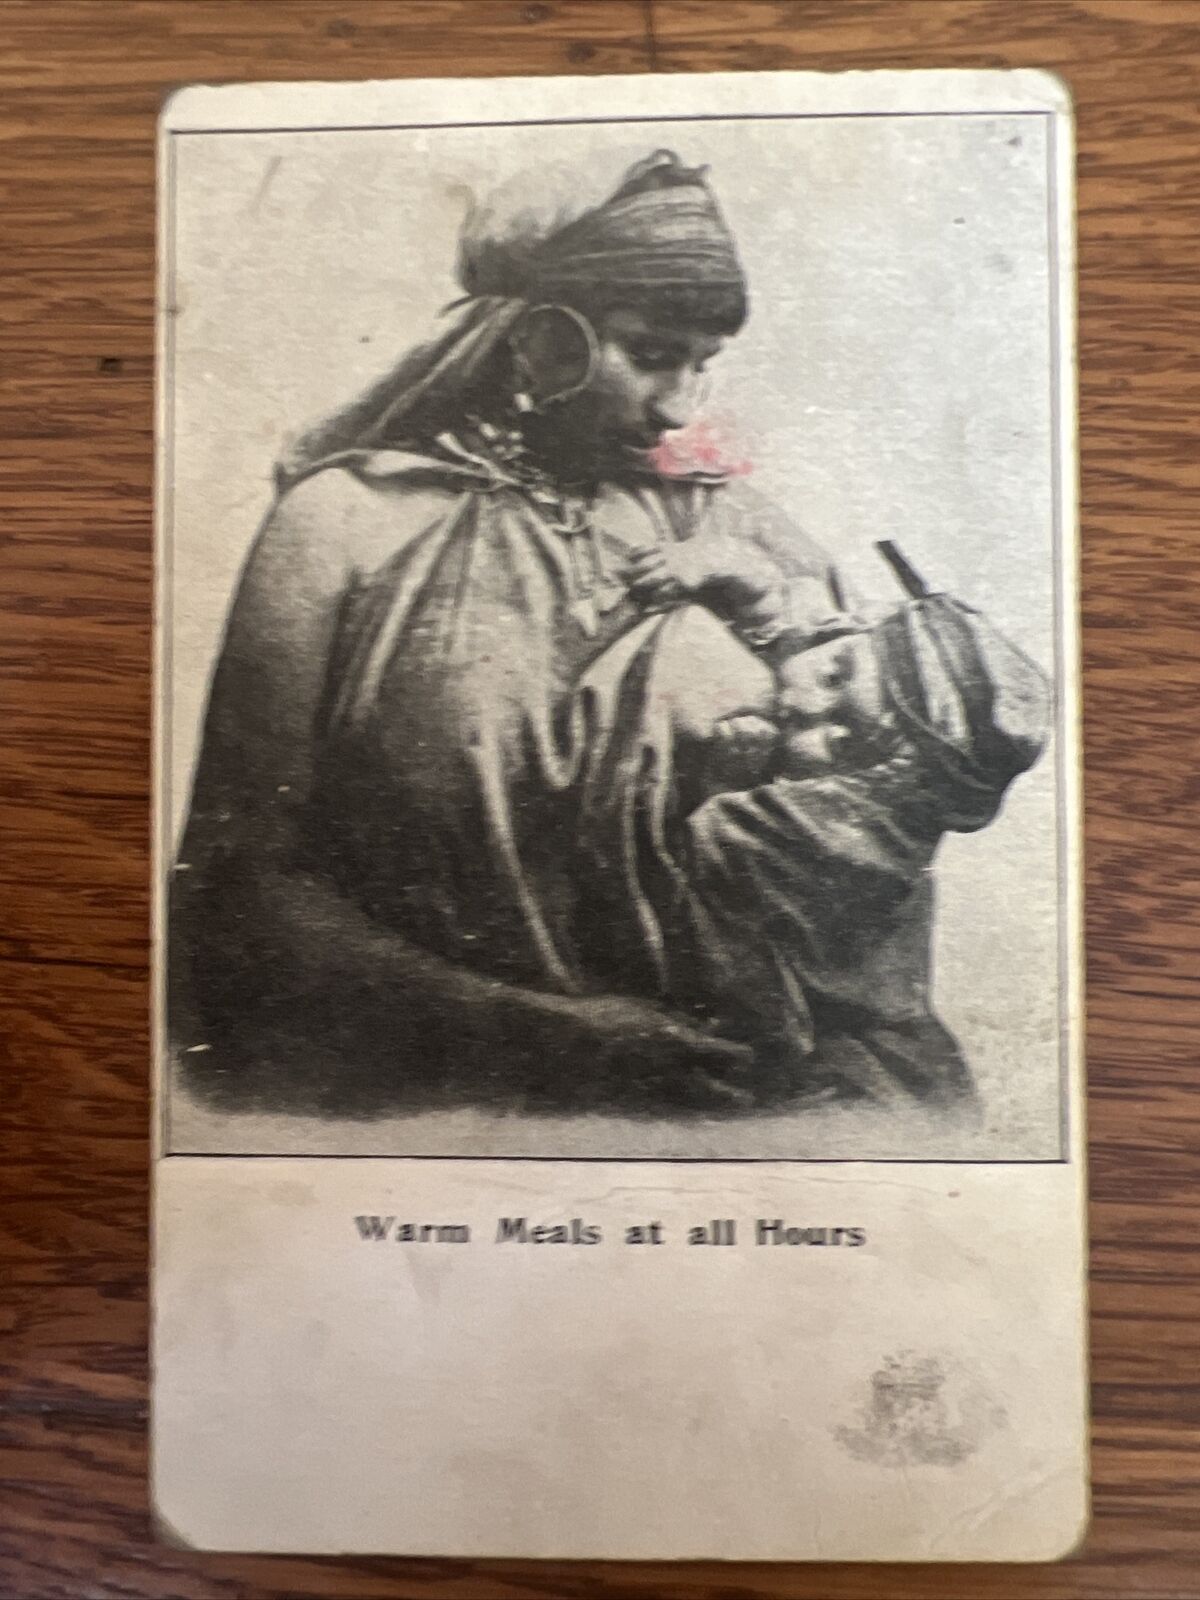 \'Warm Meals at All Hours\' RPPC Native Woman Breastfeeding Postcard c1900 201a